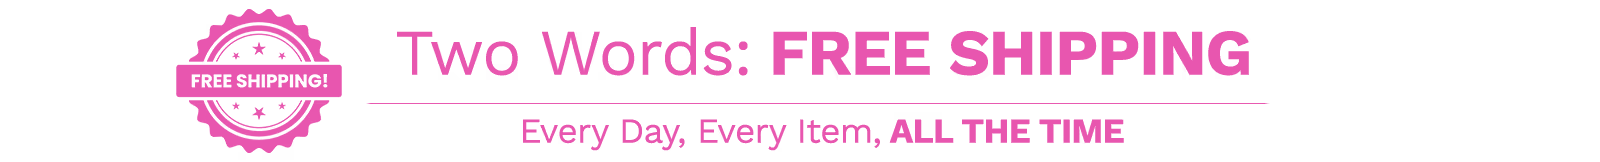 Two Words: Free Shipping